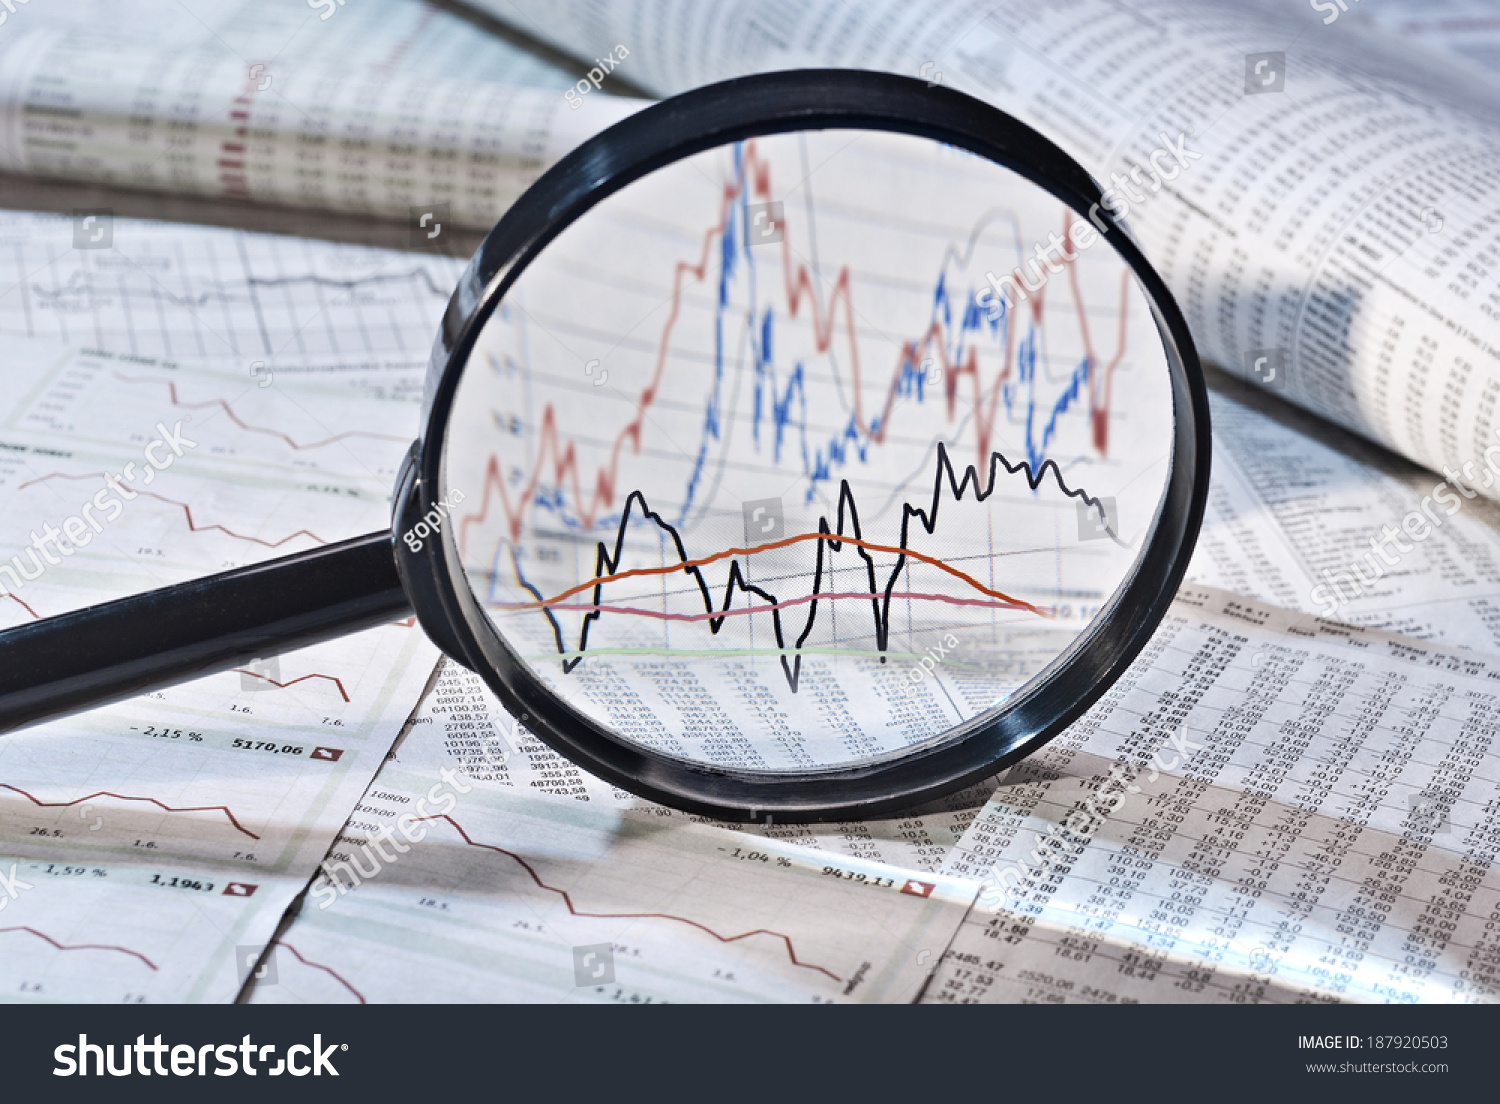 Magnifier shows the variation of stock prices, #187920503